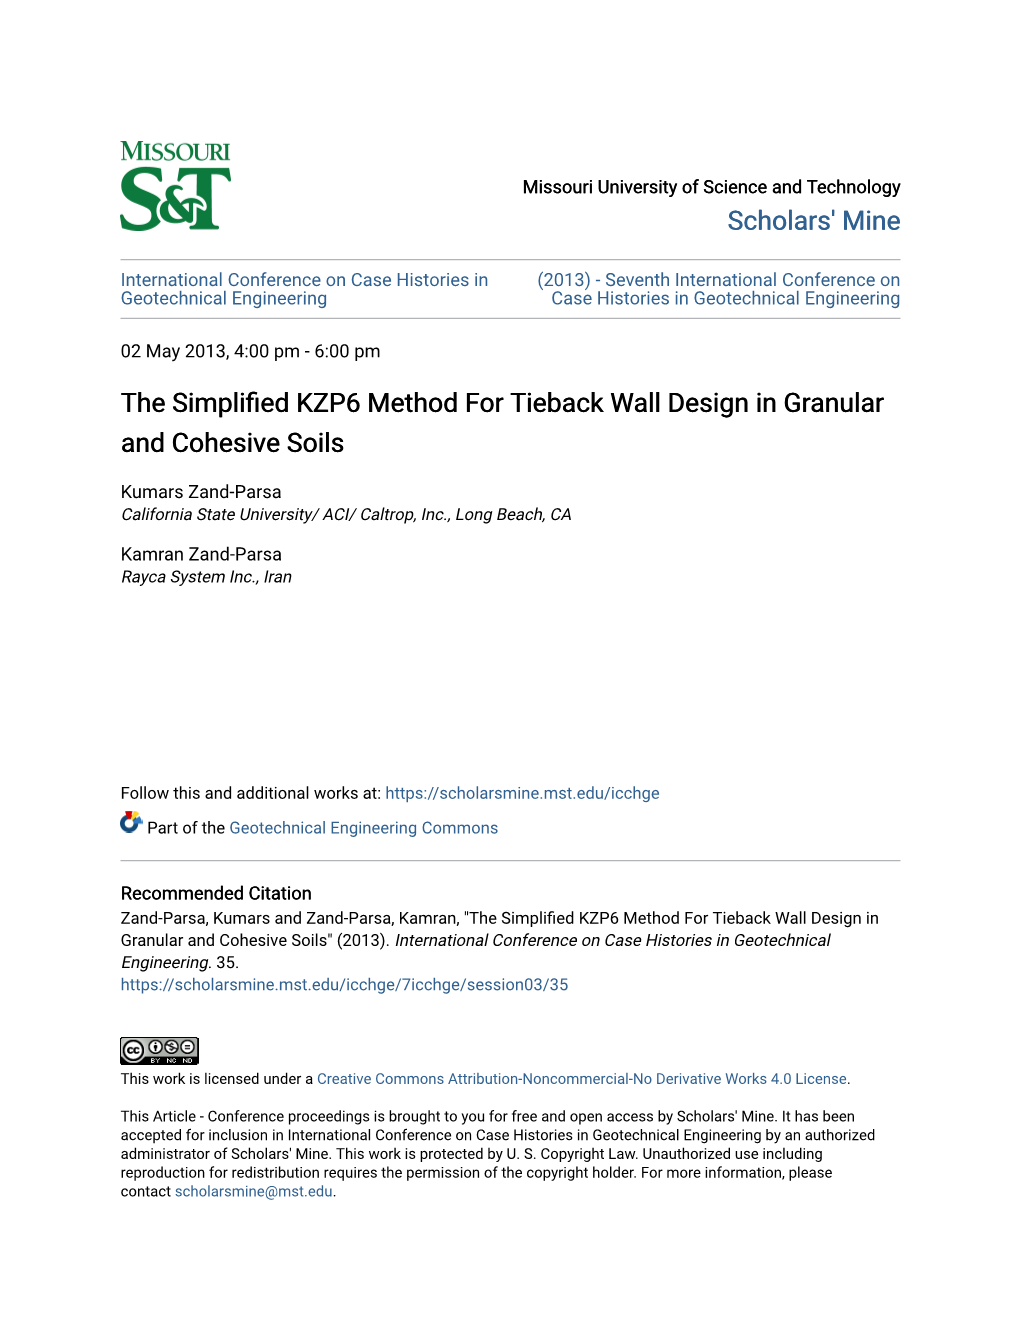 The Simplified Kzp6 Method for Tieback Wall Design in Granular and Cohesive Soils